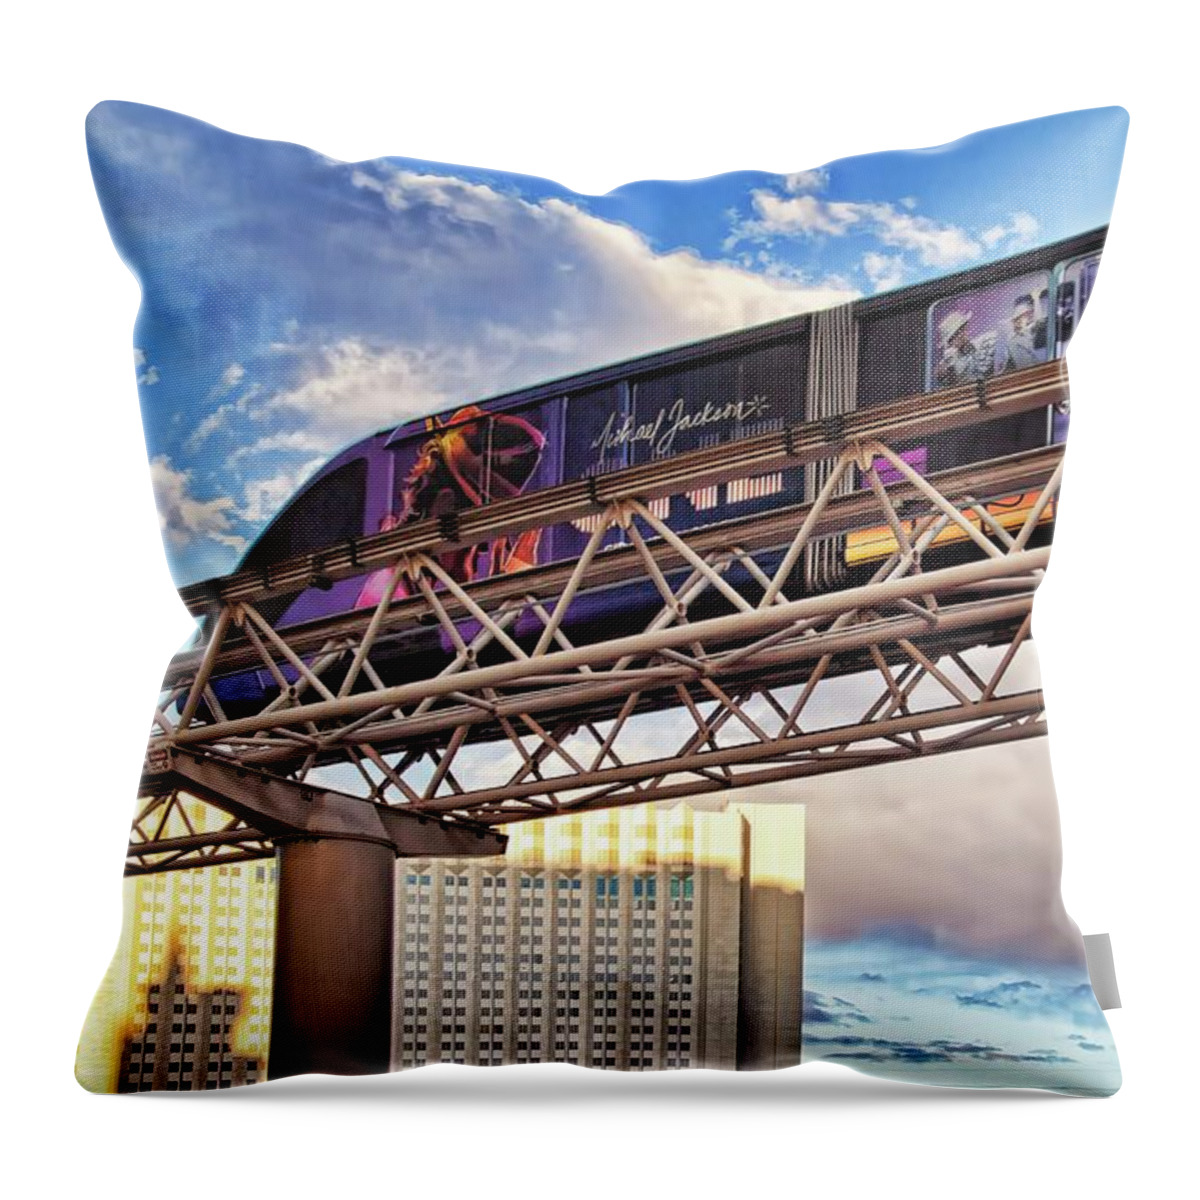 Las Vegas Monorail Throw Pillow featuring the photograph Las Vegas Monorail riding above the city by Tatiana Travelways